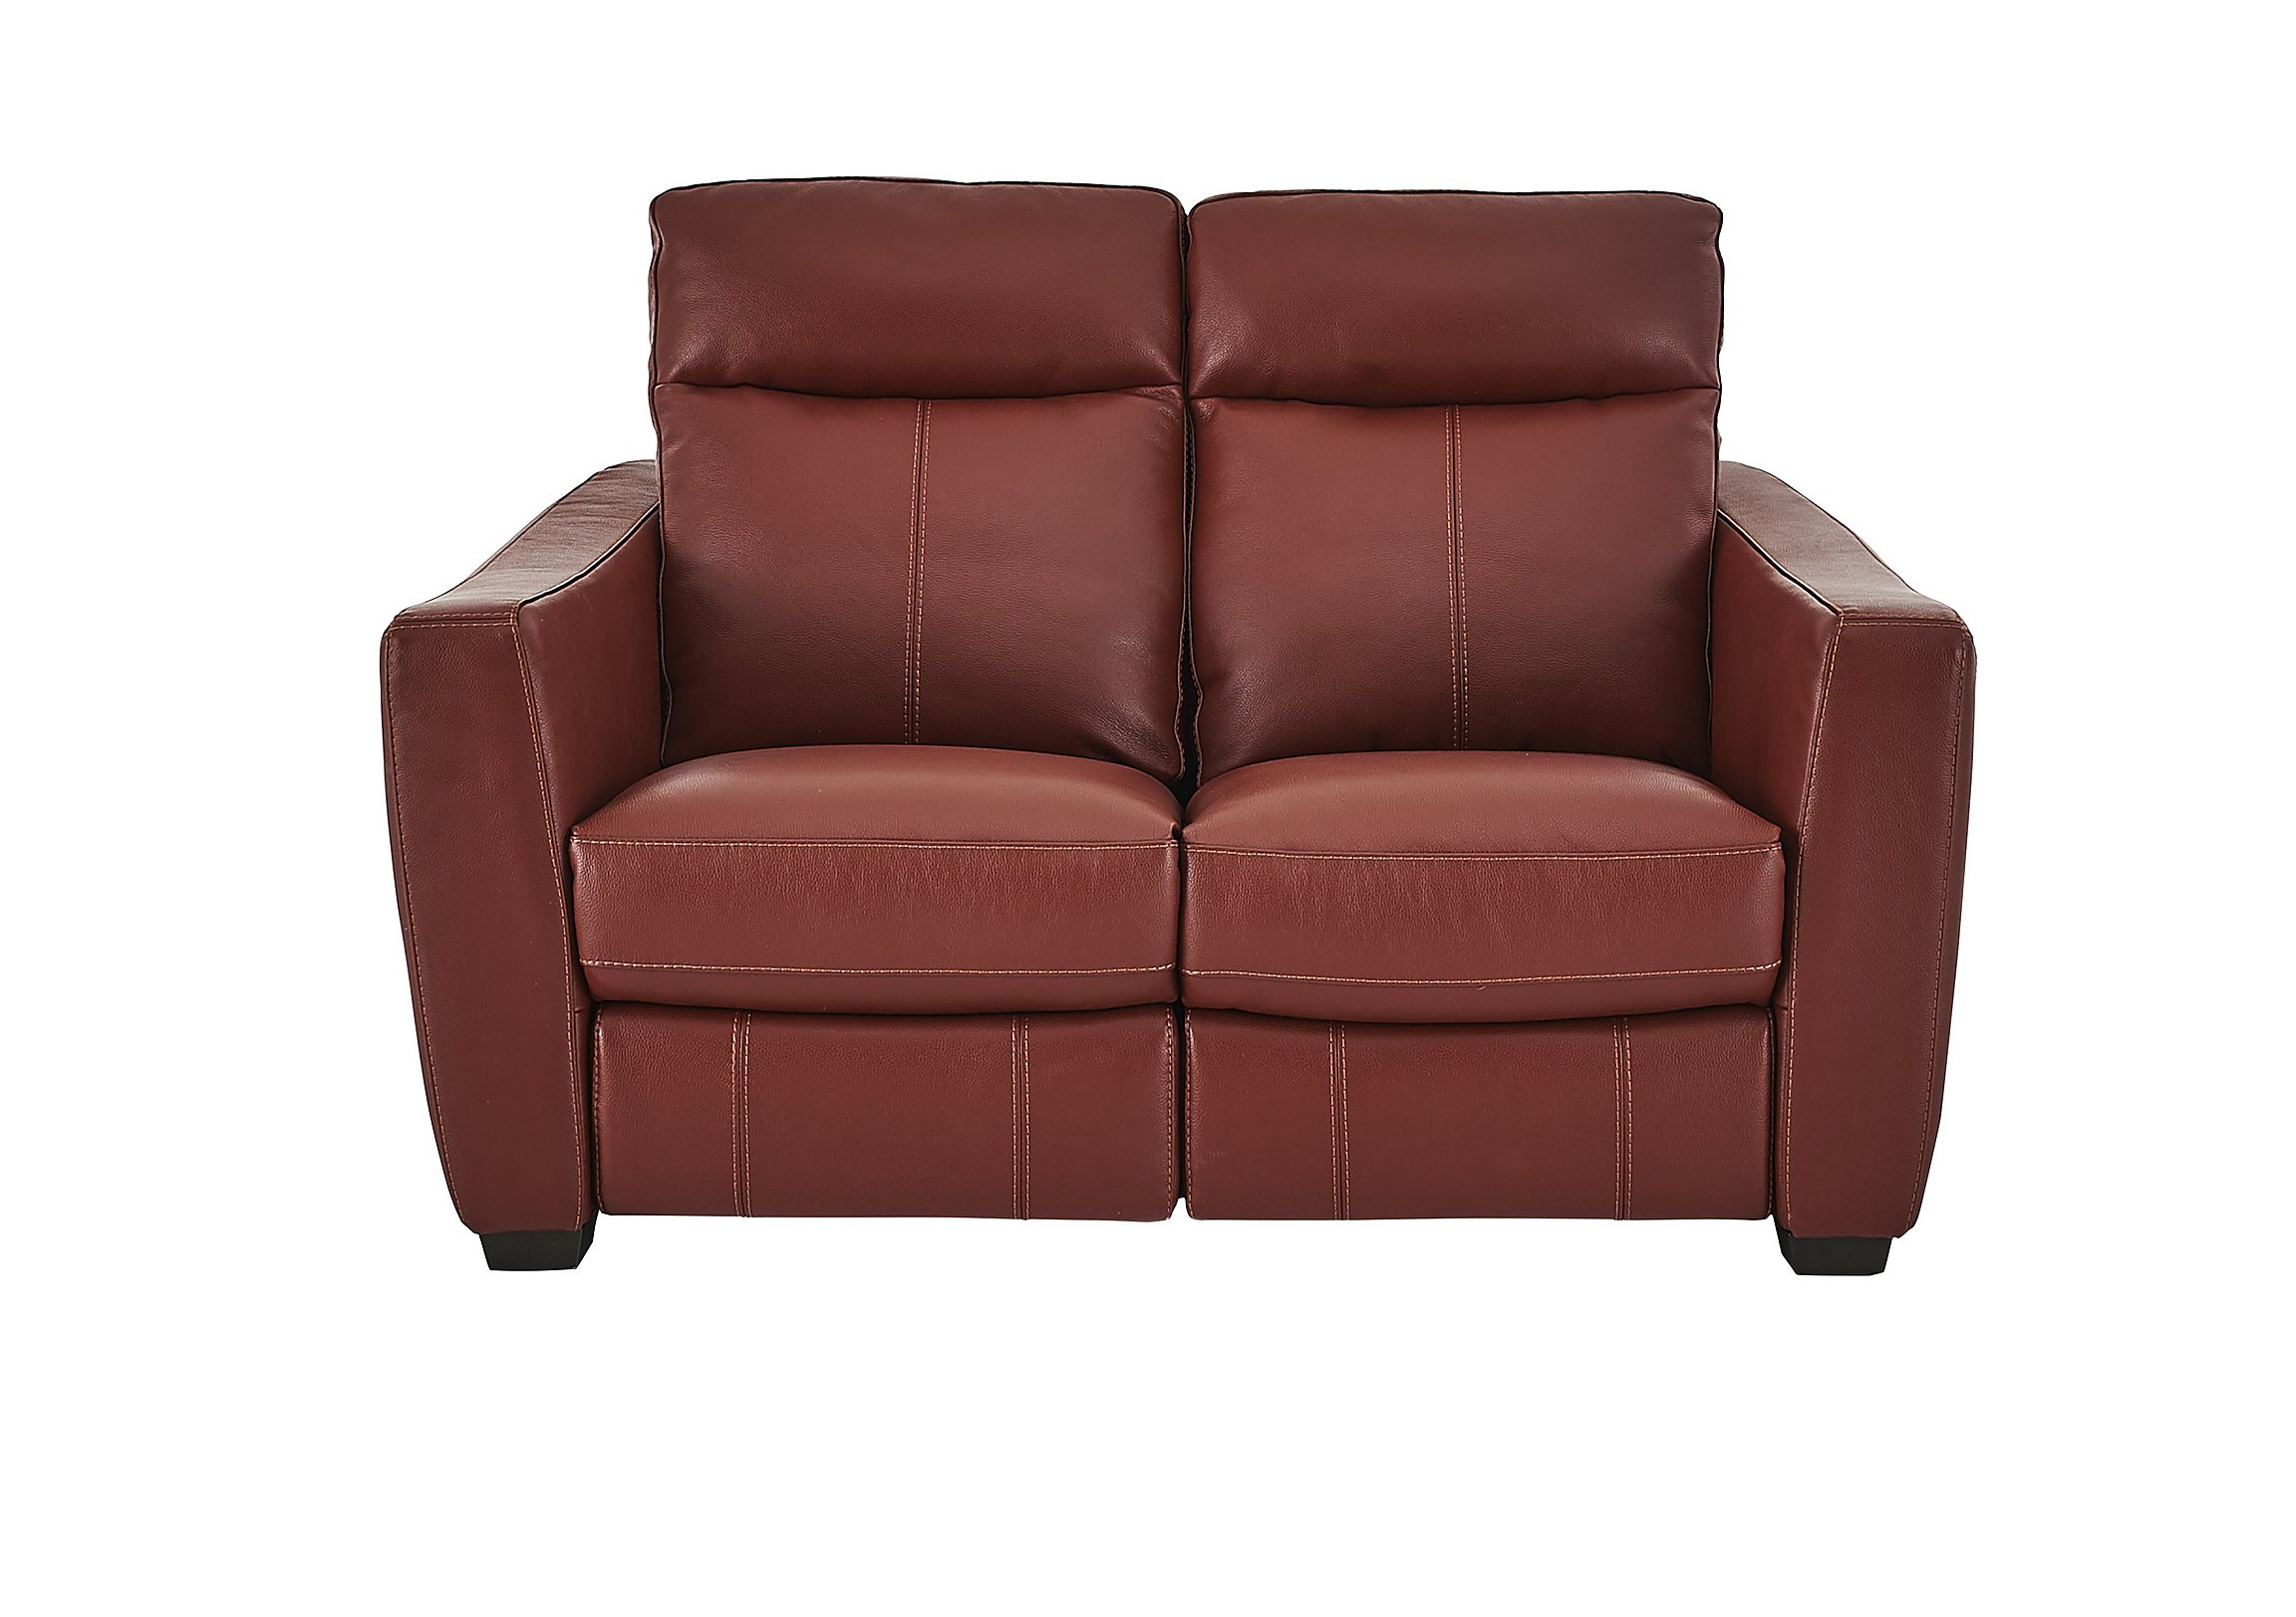 pact Collection Midi 2 Seater Leather Recliner Sofa Furniture